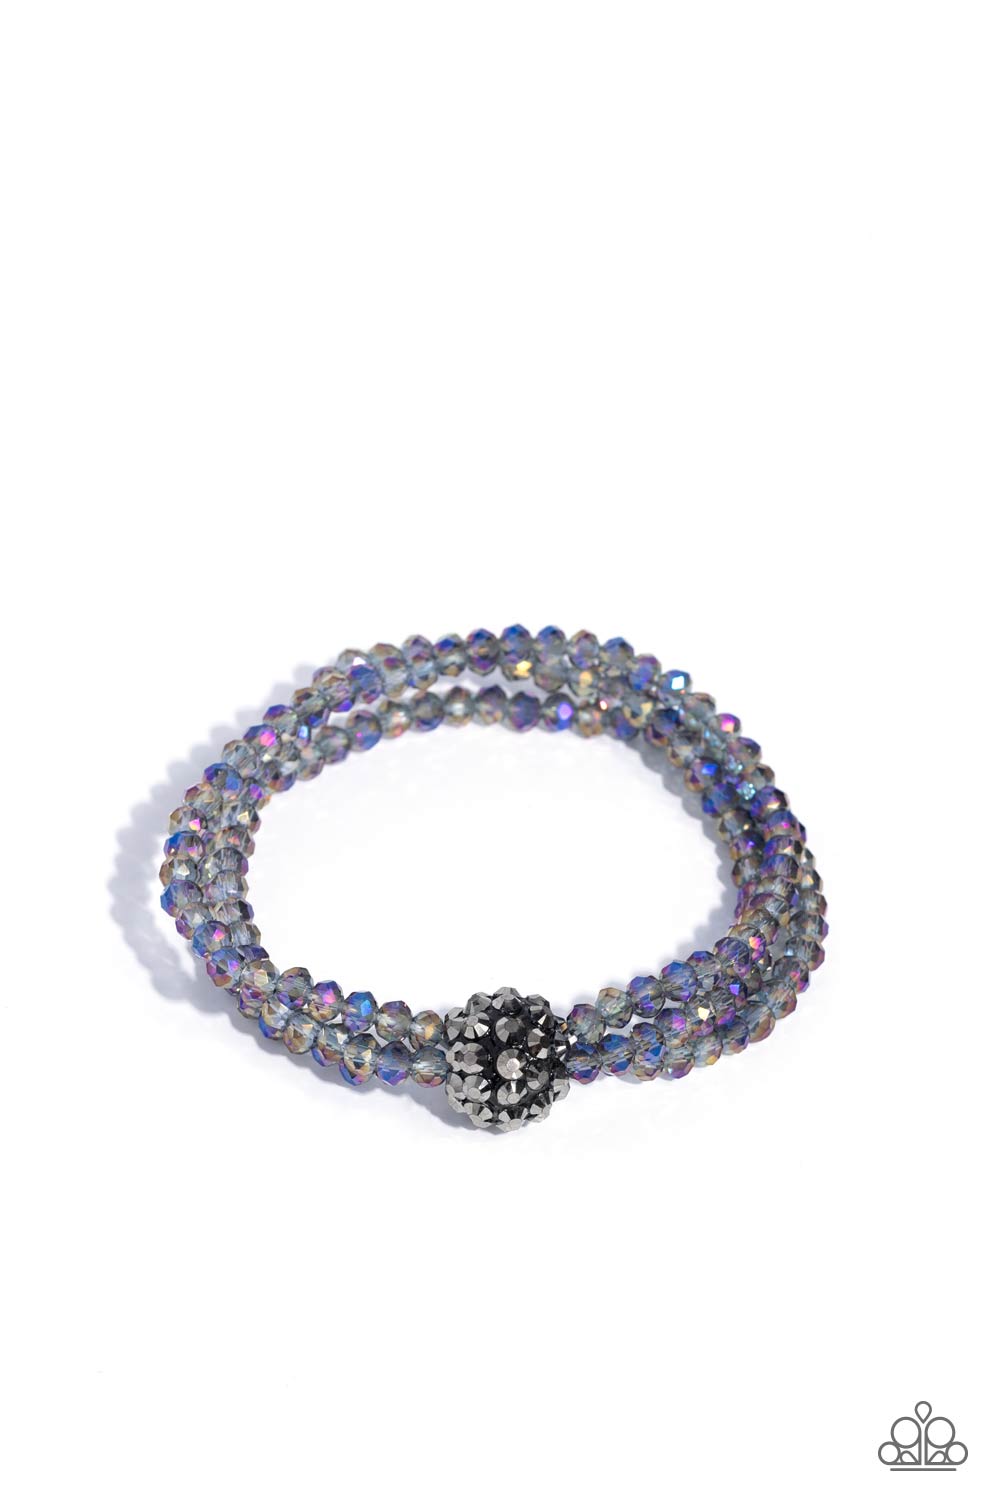 Twisted Theme Multi Stretch Bracelet - Paparazzi Accessories  Featuring faceted finishes, oil spill beads are threaded along three stretchy bands around the wrist. Encrusted in gunmetal spiky-like details, an oversized ball twists at the center of the wrist for a fierce industrial statement.  Sold as one individual bracelet.  P9RE-MTXX-146XX